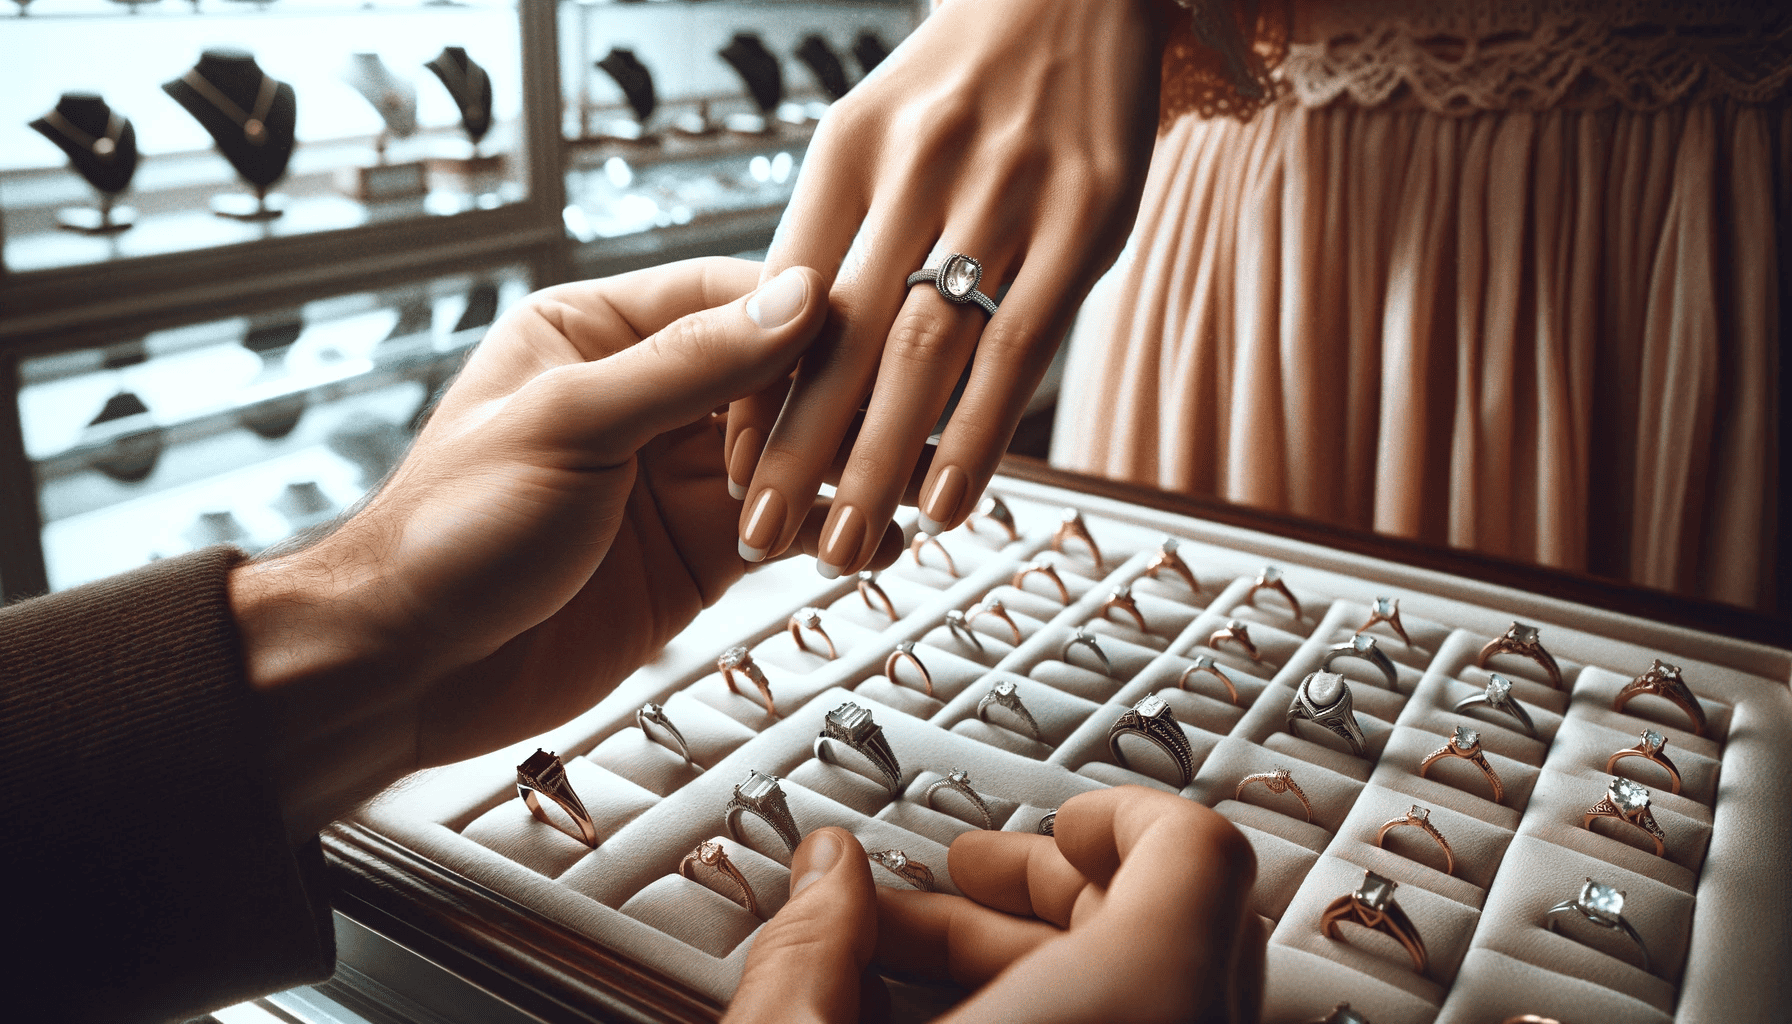 A man's right hand gently placing an engagement ring on the fourth finger of a black or brown-skinned woman's left hand. The couple is in a cozy jewelry store, surrounded by a selection of vintage engagement rings. This heartfelt moment captures the romance and significance of choosing the perfect ring, symbolizing their love and commitment.